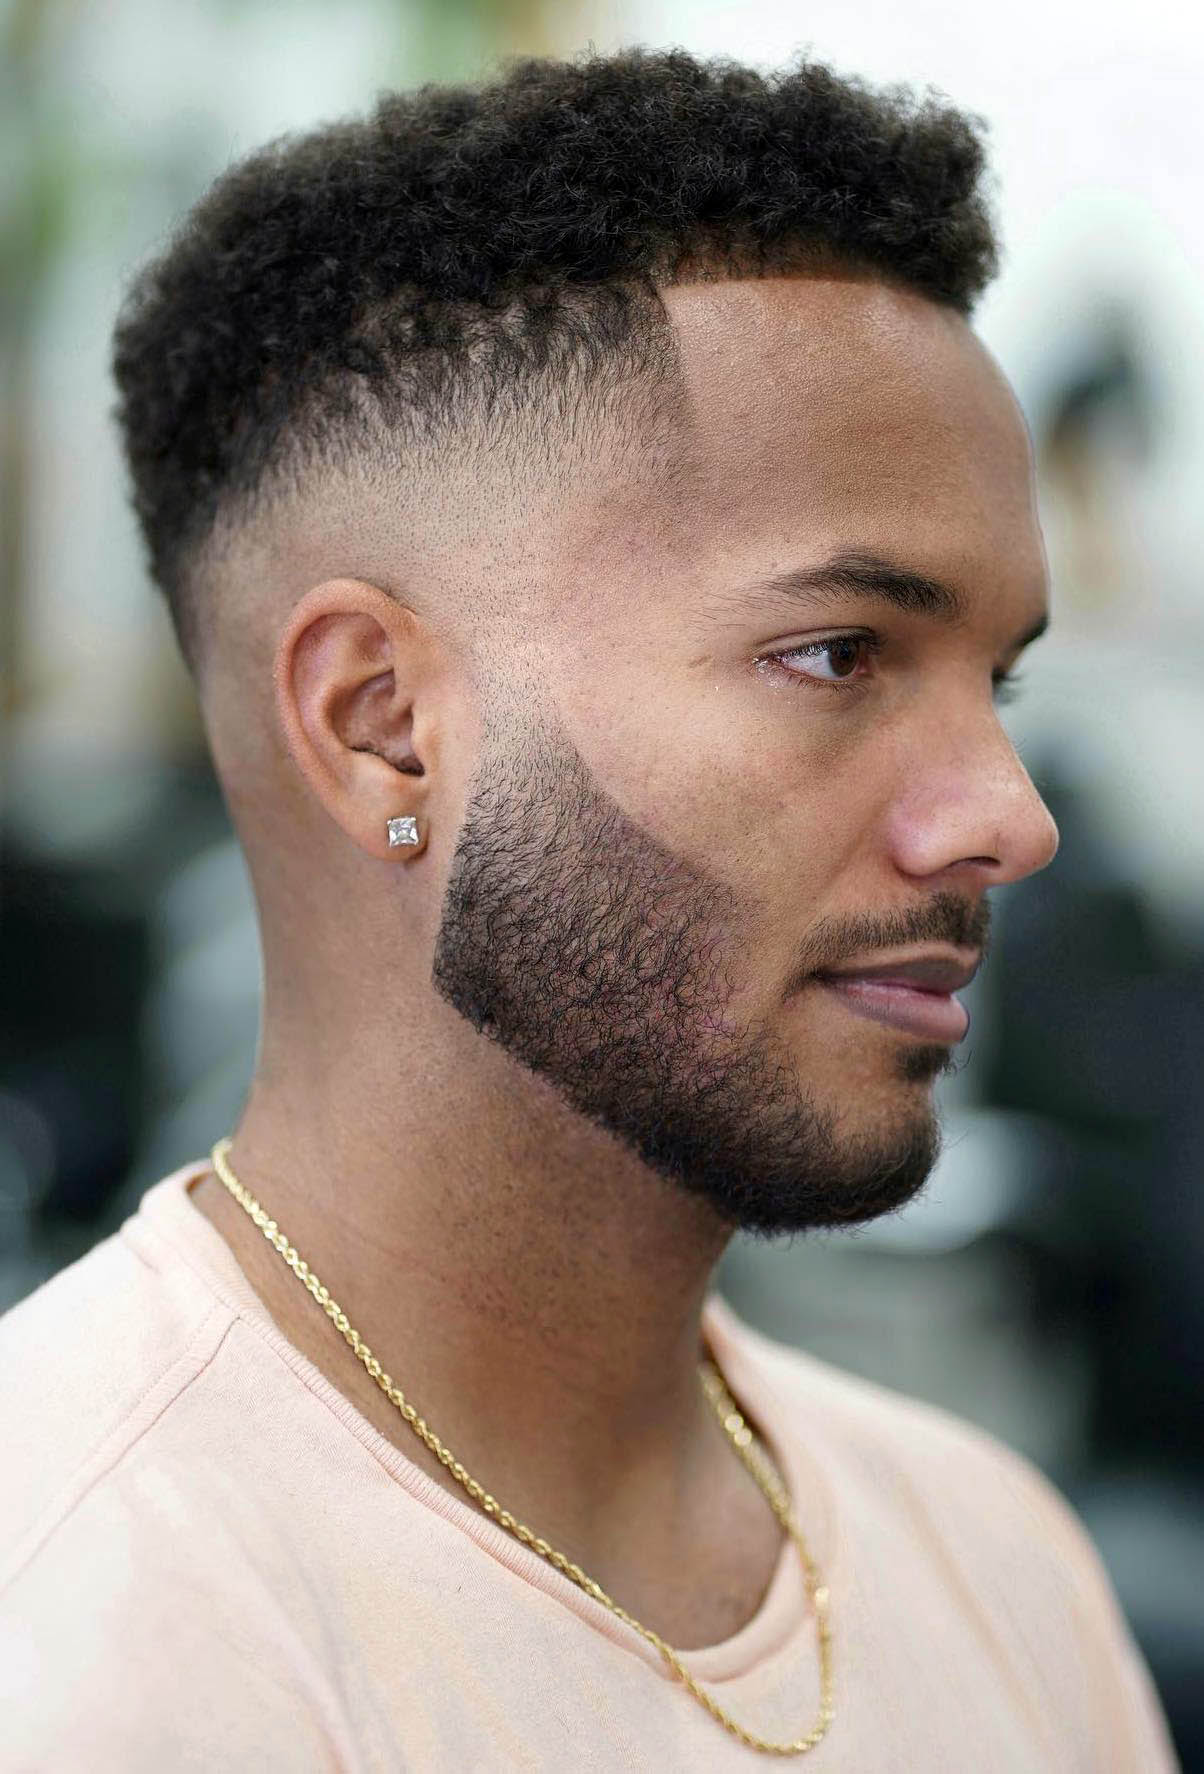 The 18 Best Men's Hairstyles to Try in 2023 - The Modest Man